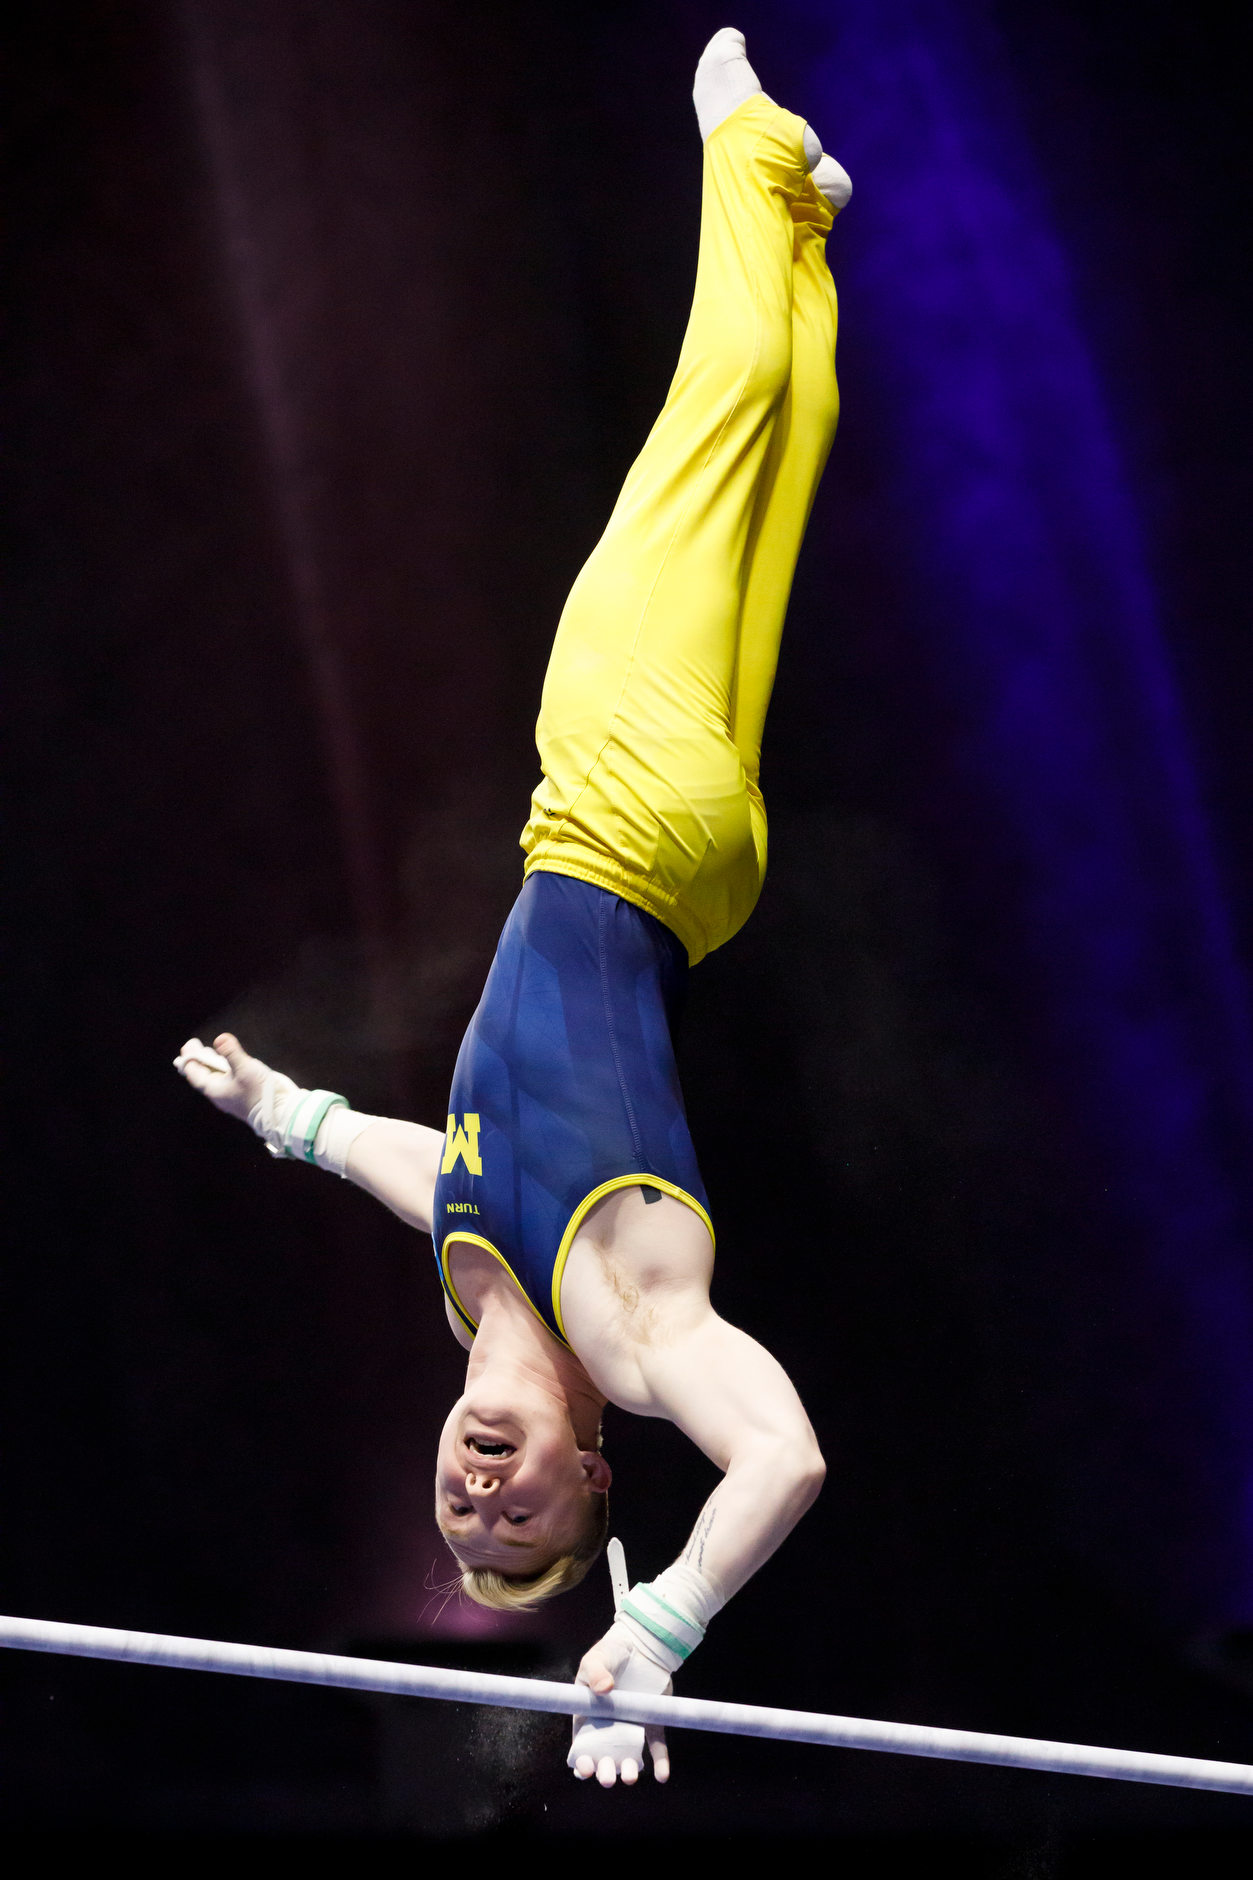 Michigan's Cameron Bock competes on the horizontal bar at the NCAA Men's Gymnastics Championships on Saturday, April 20, 2019, at the State Farm Center in Champaign, Illinois. (Photo by James Brosher)